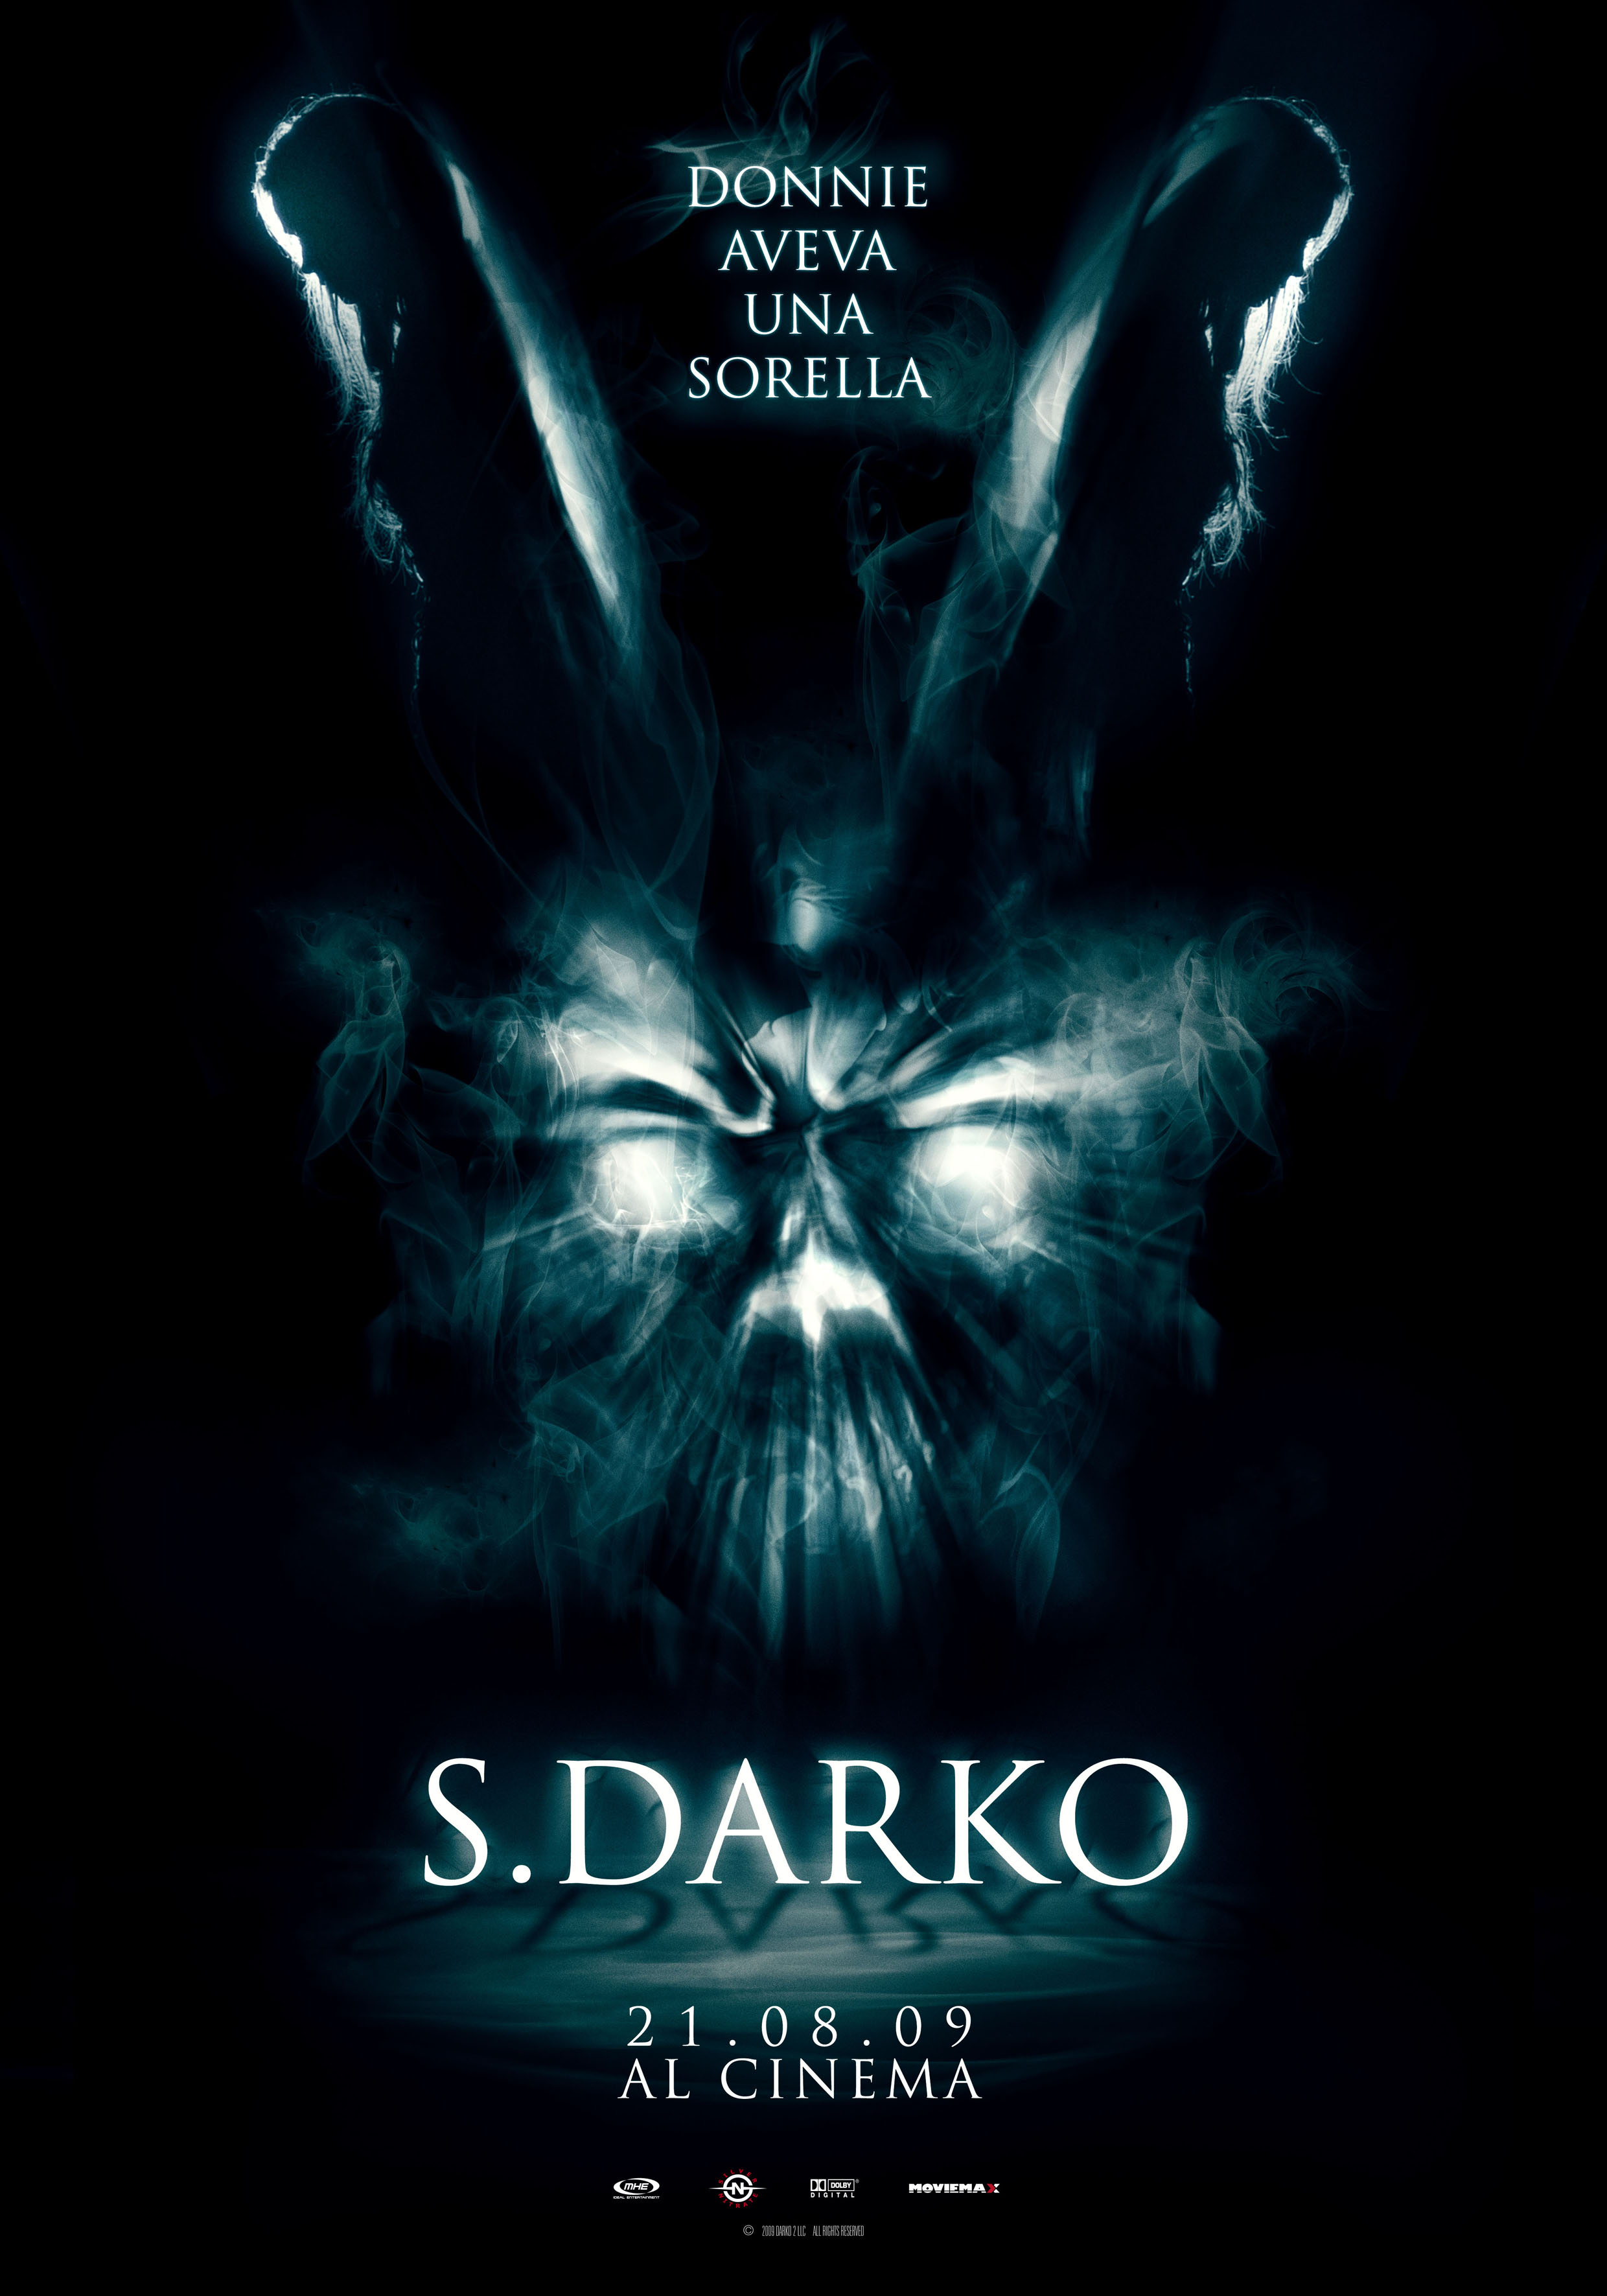 Donnie Darko, movie posters - HD Wallpaper View, Resize and Free Download /  